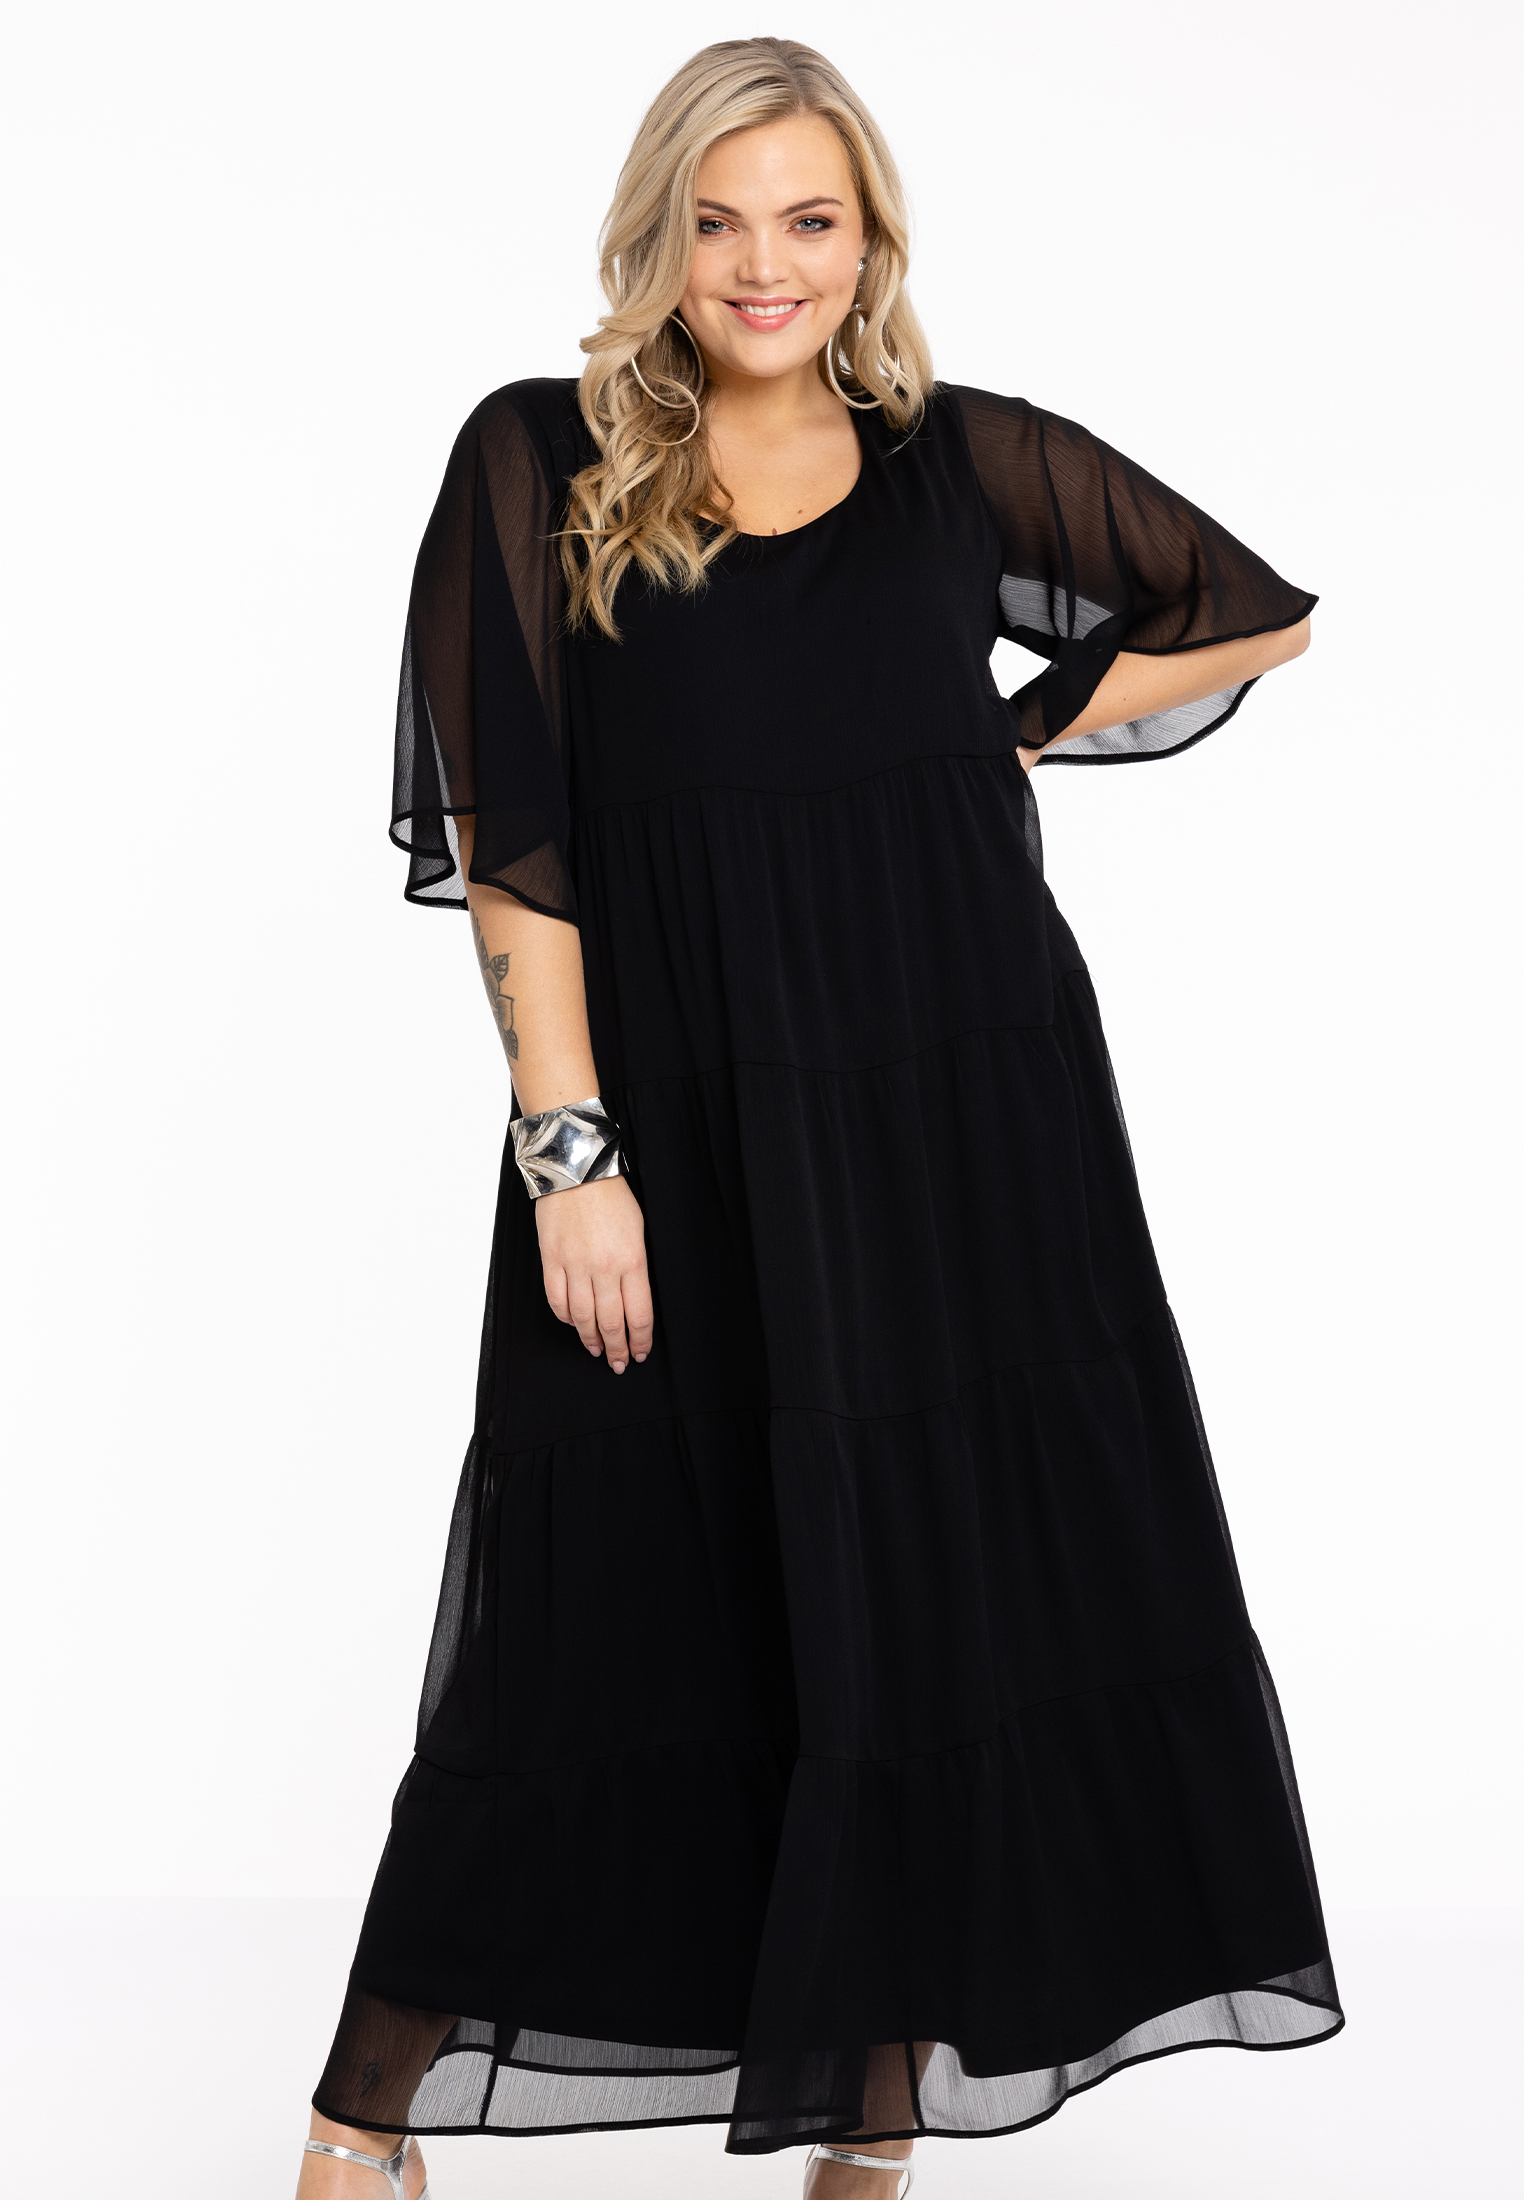 Women's Plus Size Clothing - options for with fuller figures